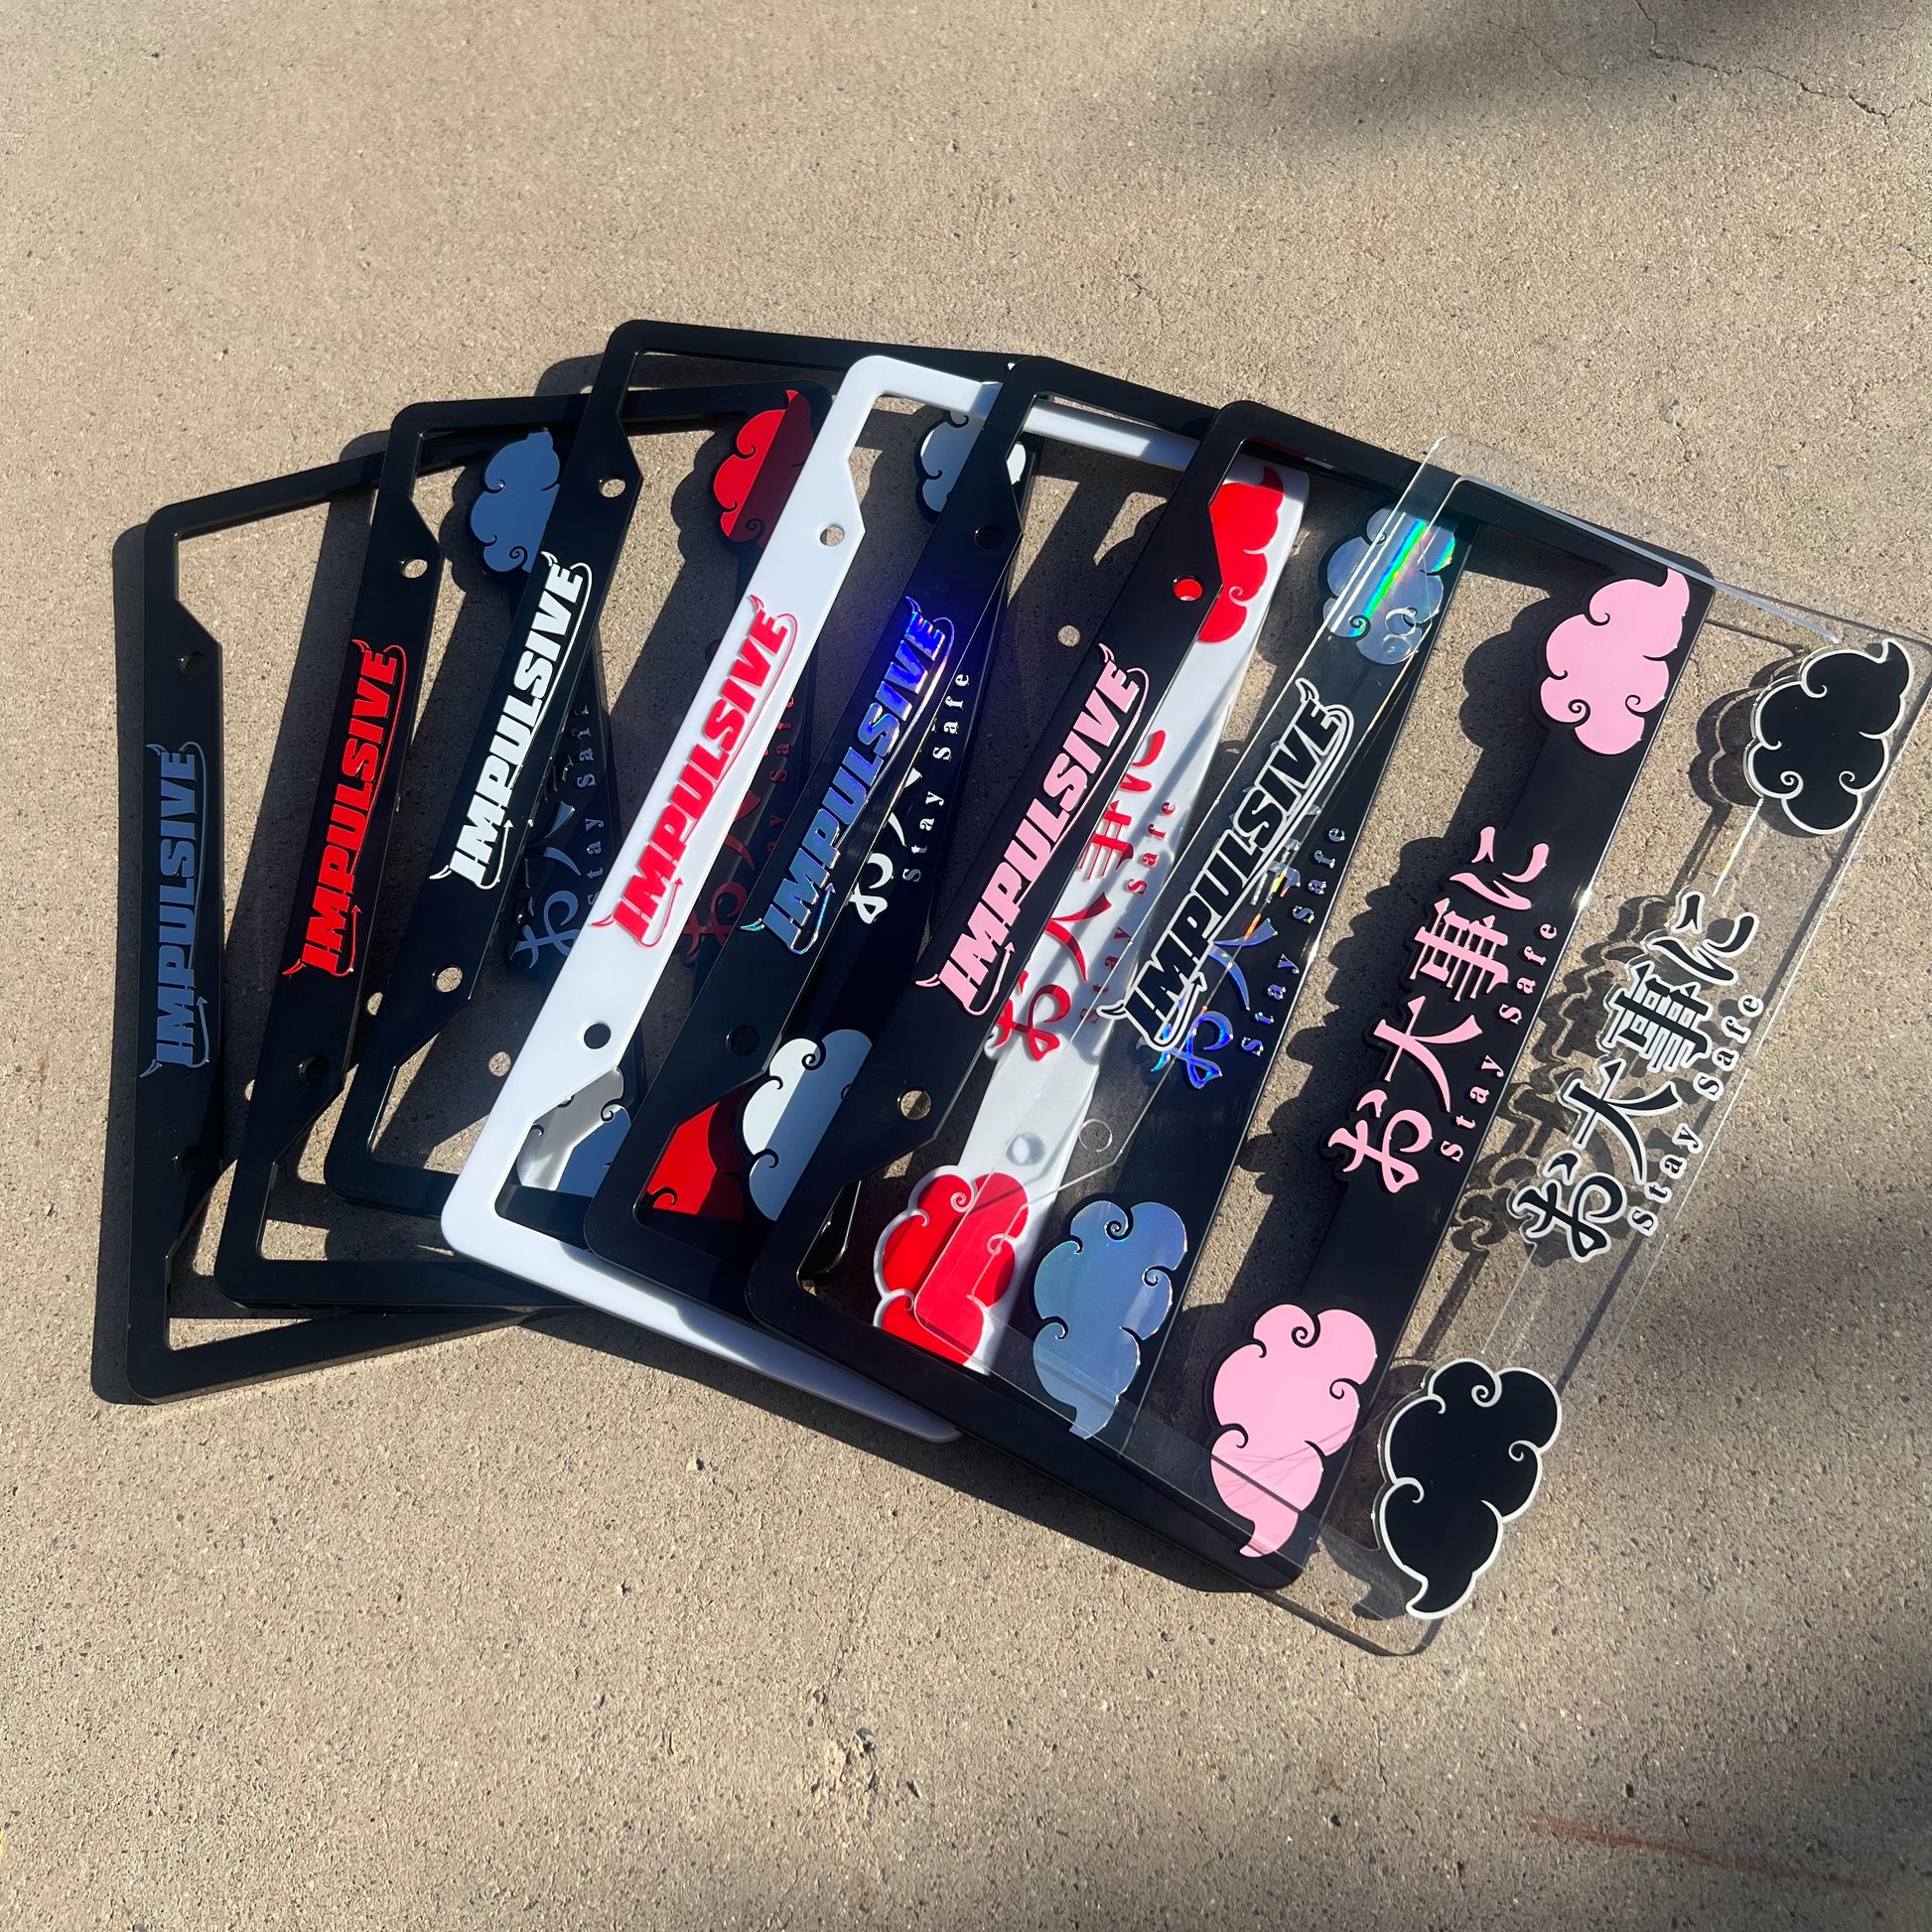 Japanese anime inspired plastic custom License Plate Frame. Top has Impulsive logo and the bottom has japanese characters and english translated to stay safe surrounding with japanese clouds. Asian inspired. Black Frame with Red lettering.